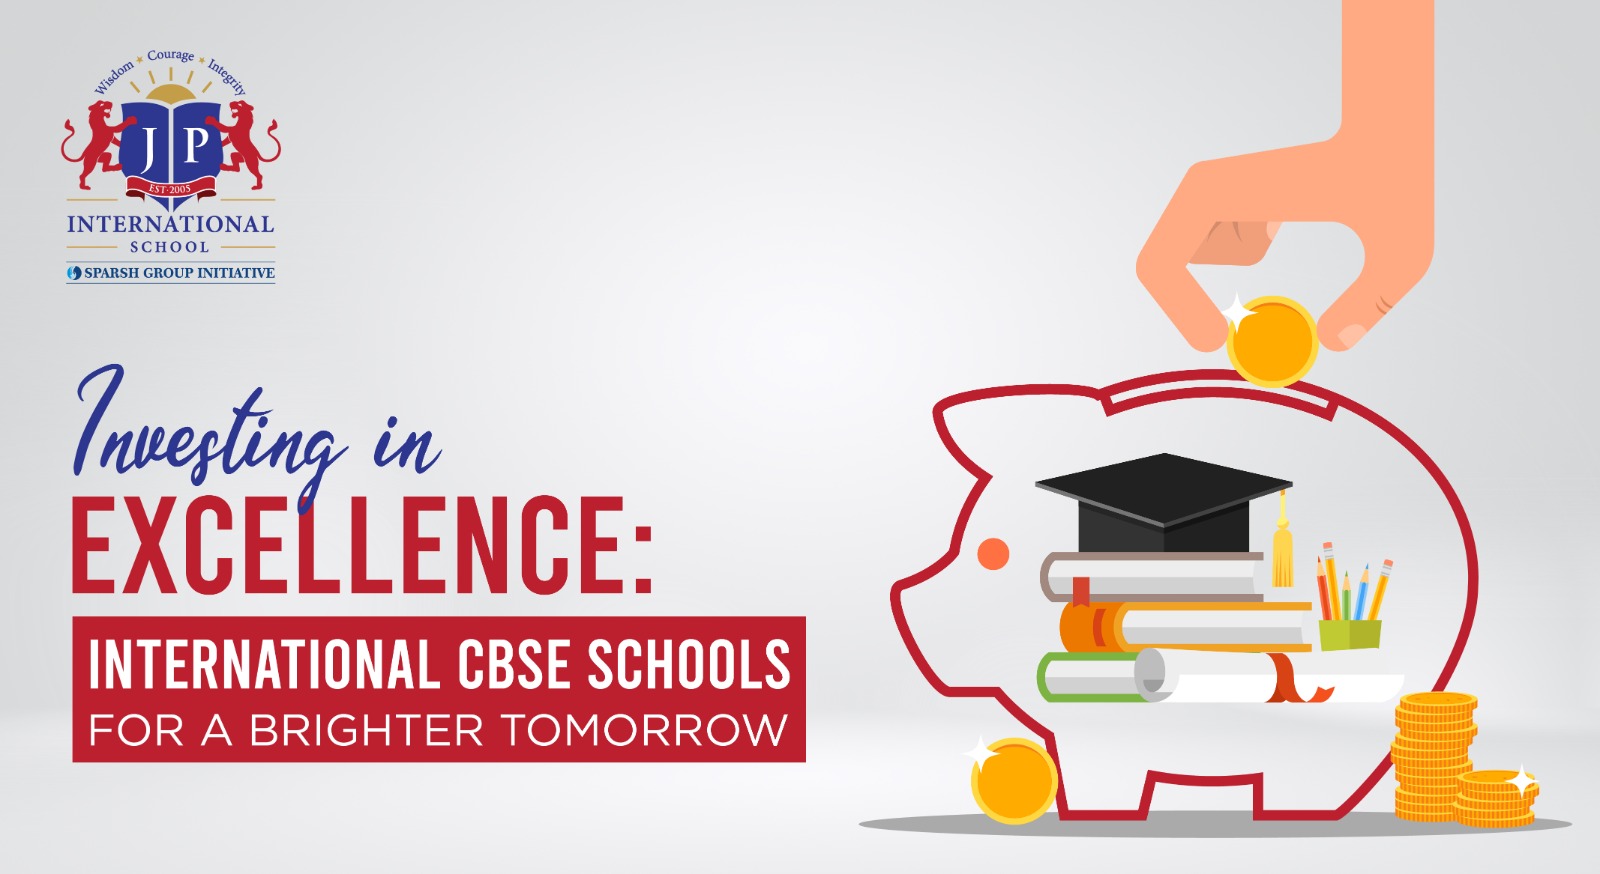 Investing in Excellence:  International CBSE Schools for a Brighter Tomorrow